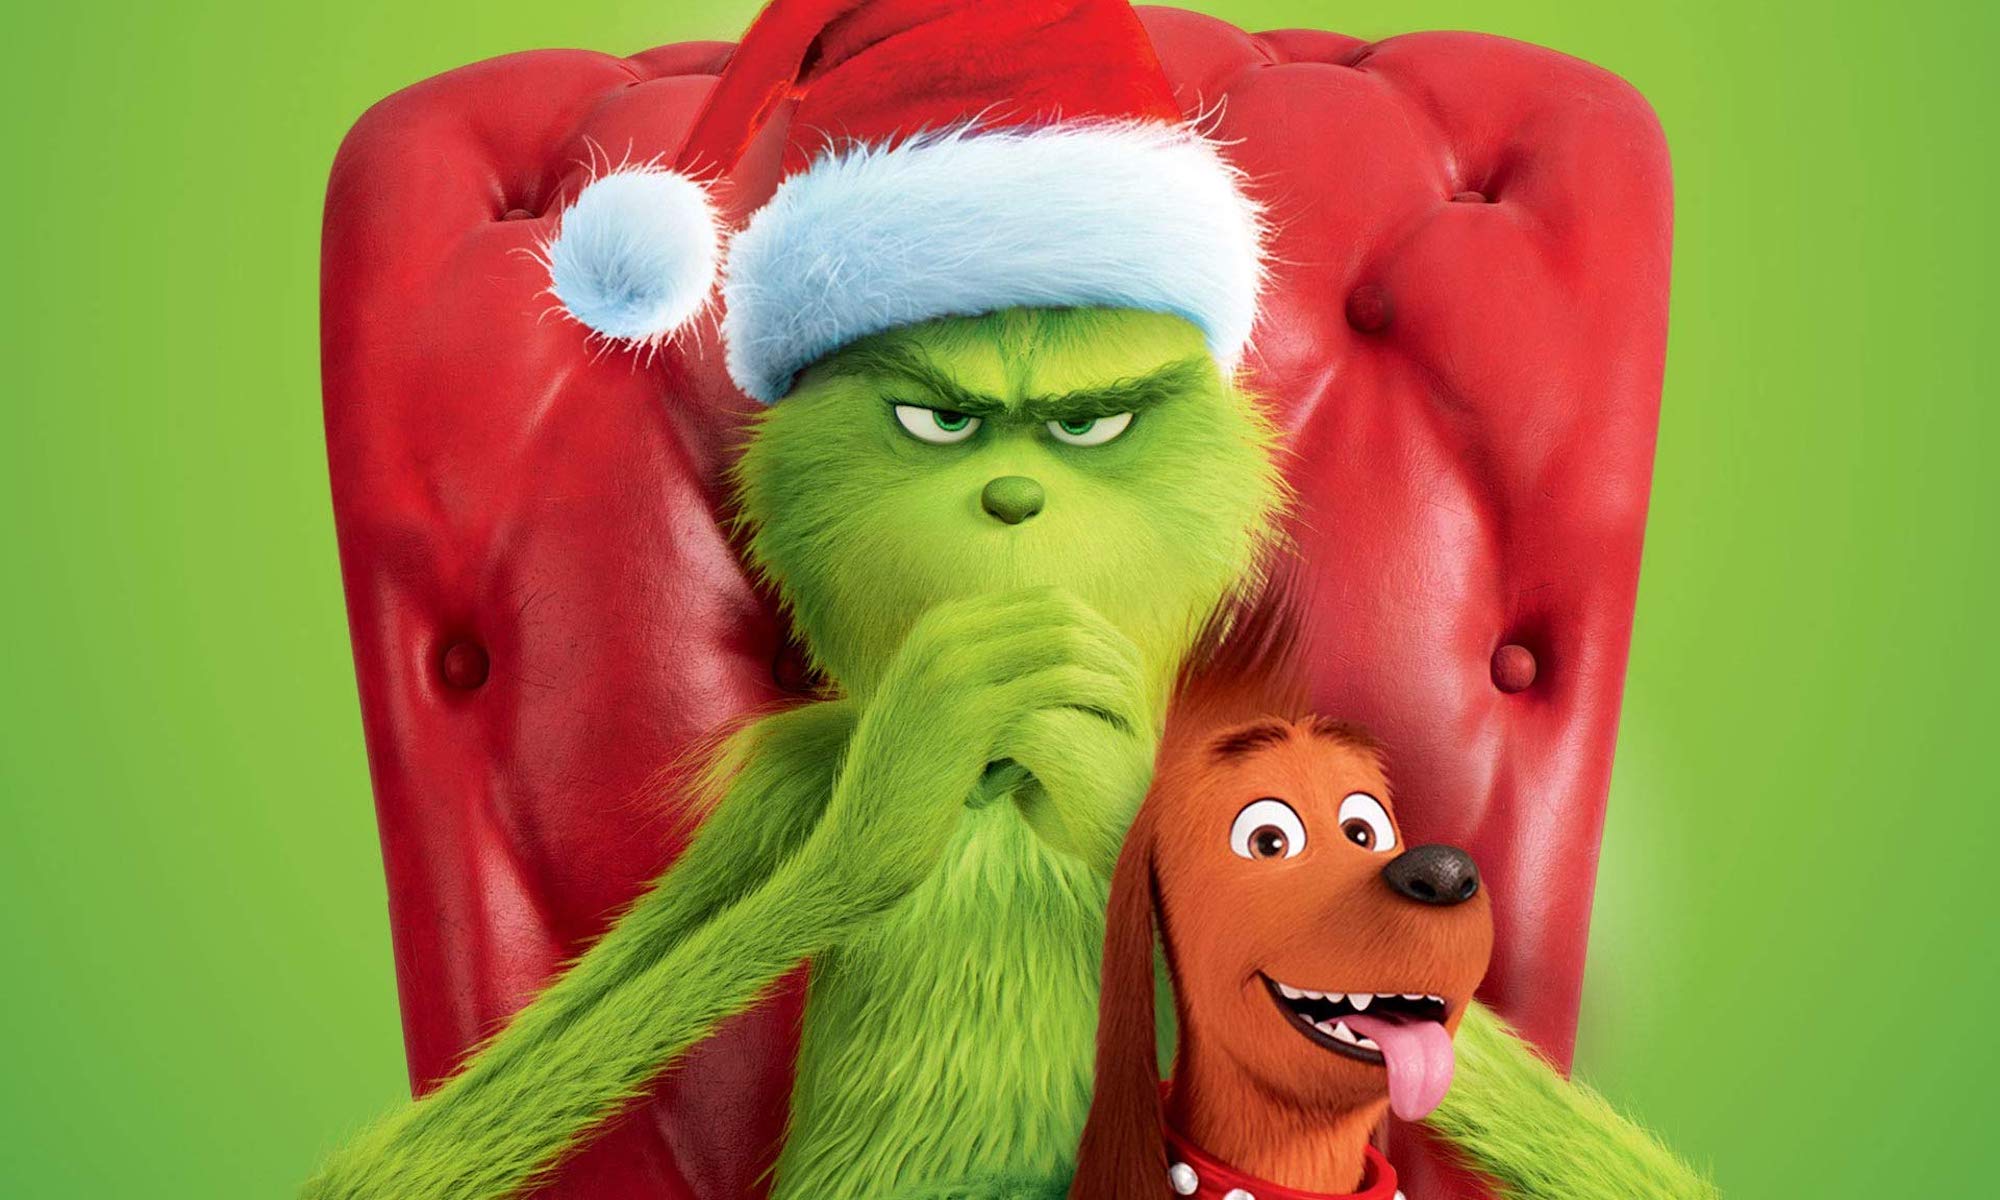 Grinch on a red chair with his brown dog